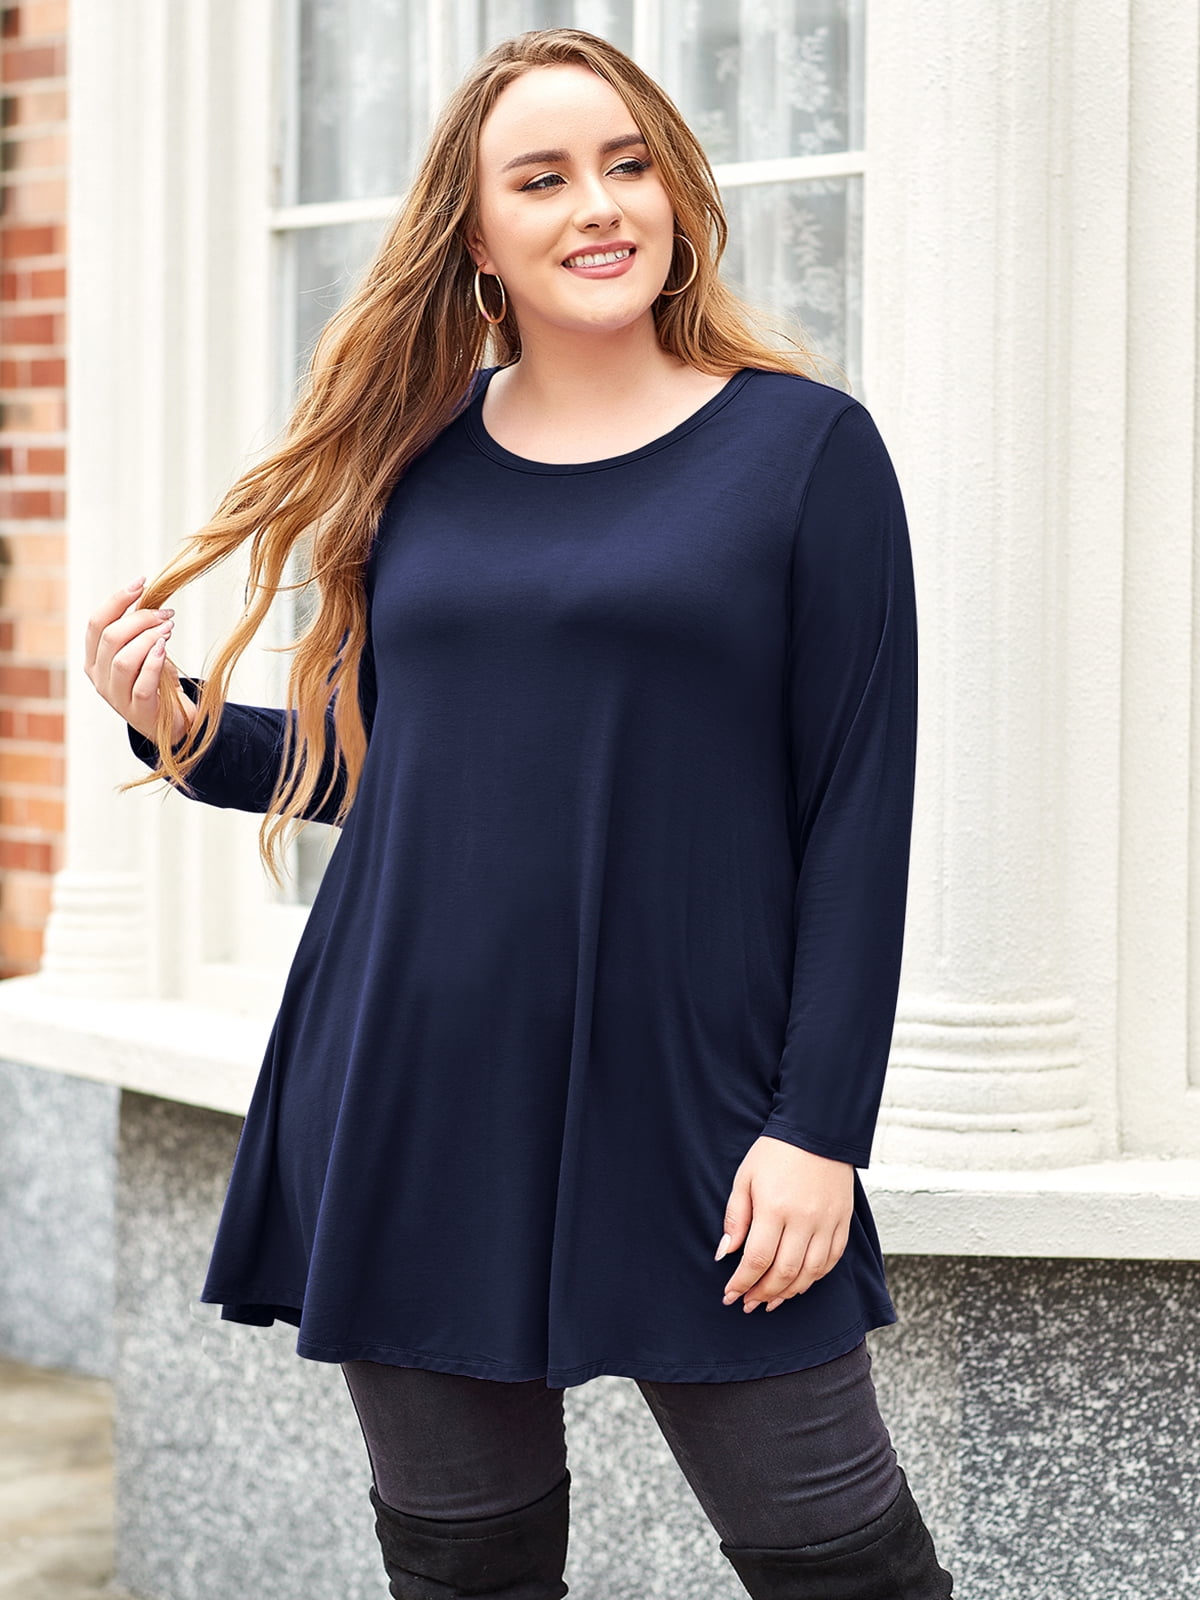 LARACE Plus Size Tunic Tops Long Sleeve Shirts for Women Swing Flowy Loose  Fit Clothes for Leggings Navy Blue 4X